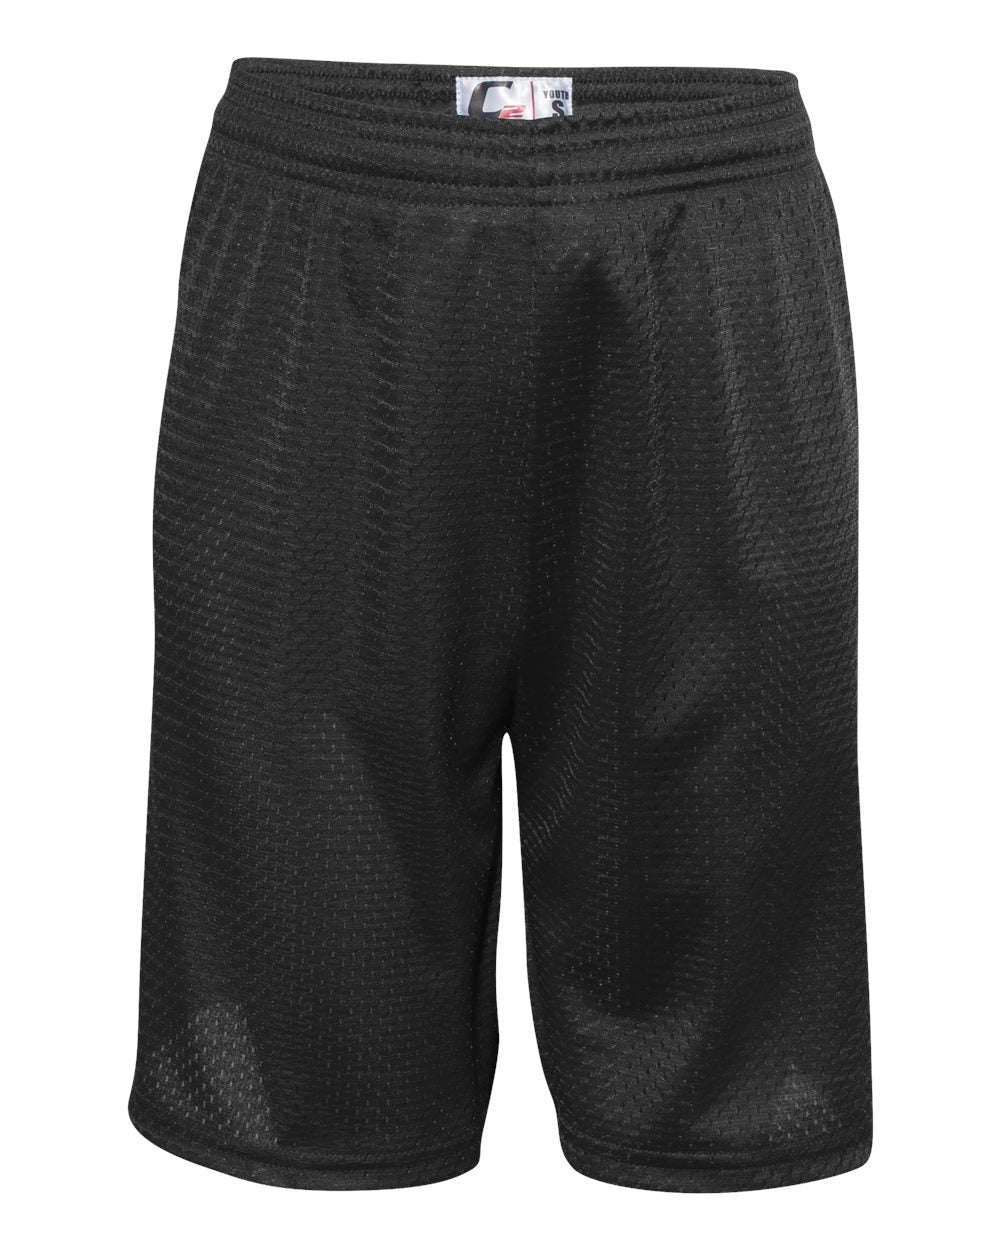 C2 Sport Youth Mesh Shorts 5209 #color_Black